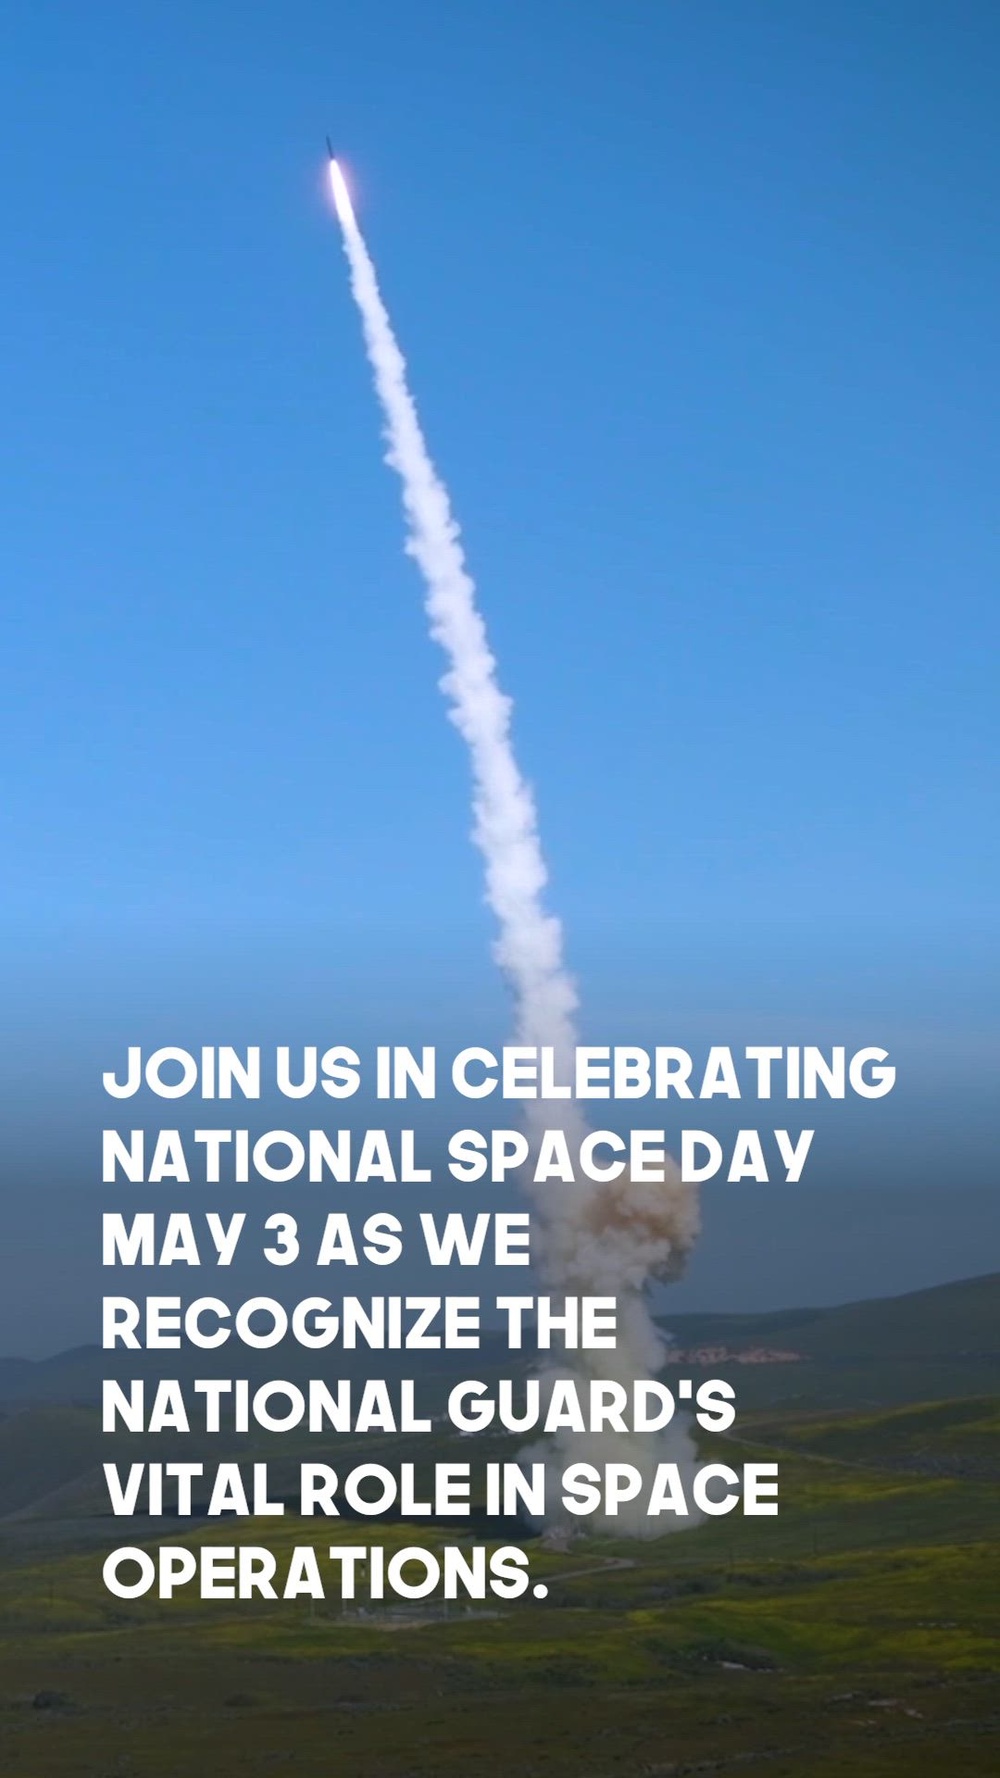 DVIDS – Video – National Guard celebrates National Space Day